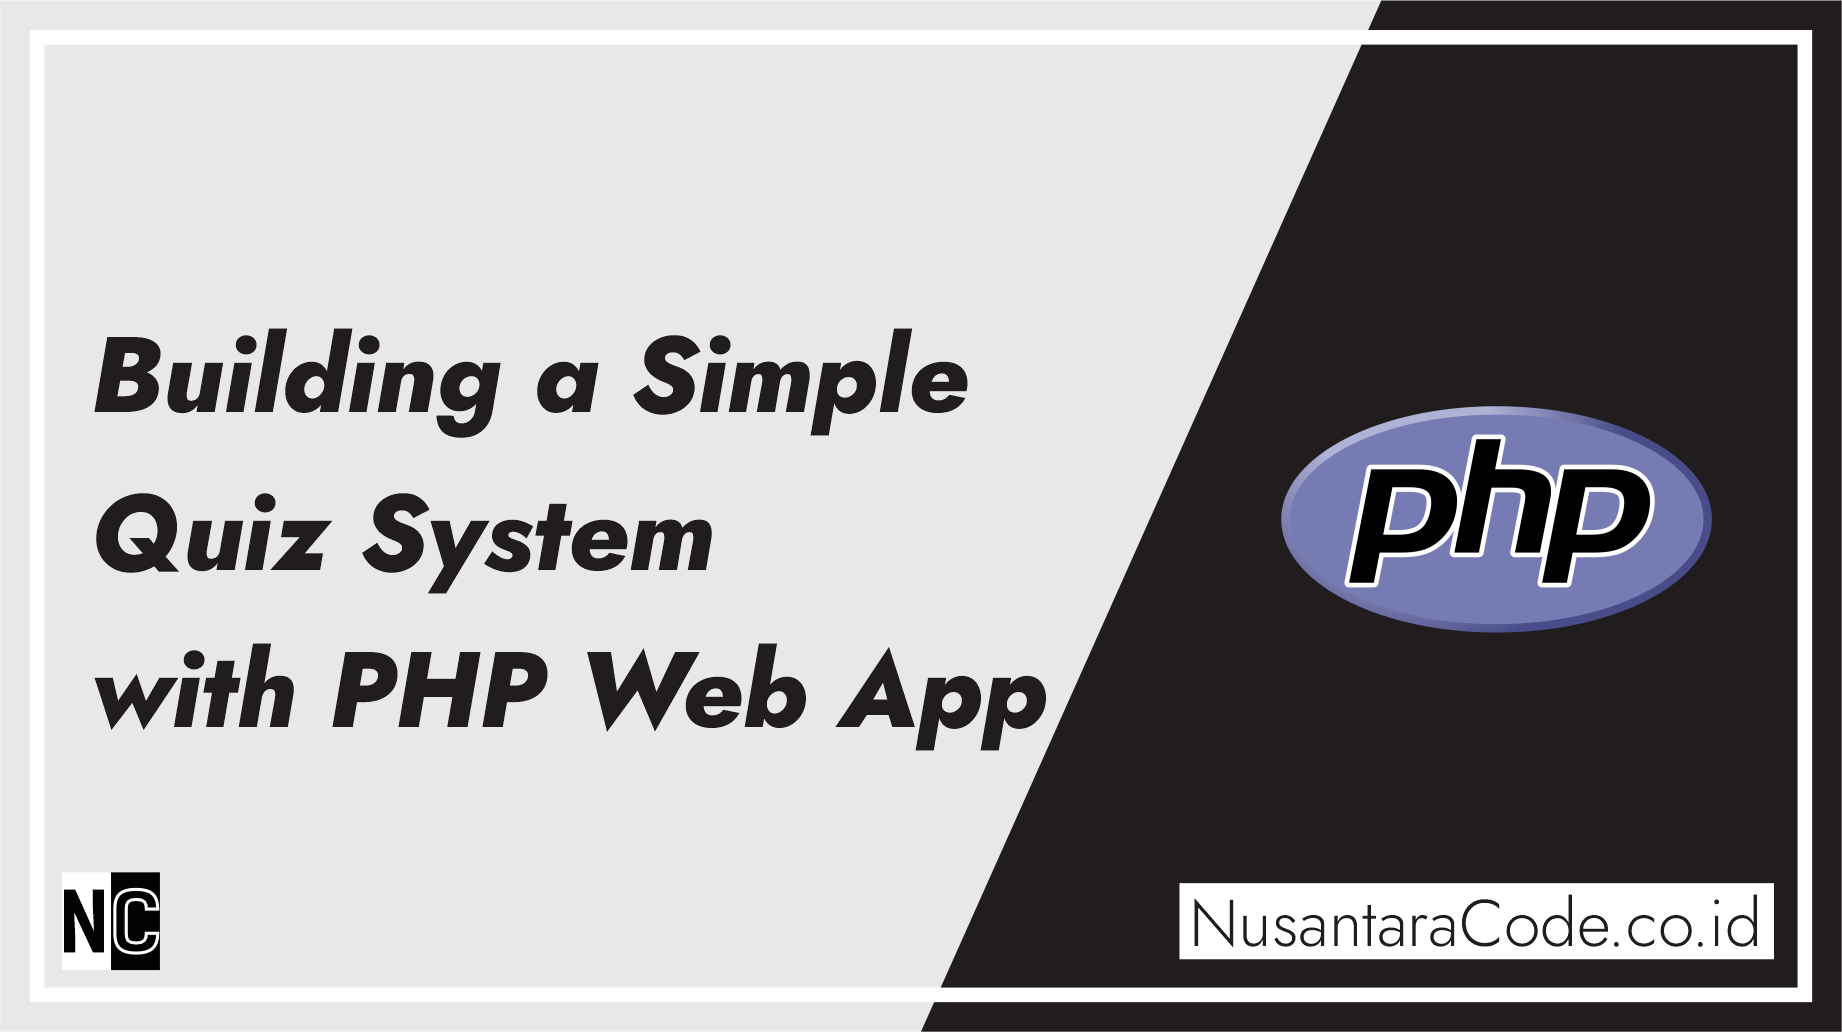 Building a Simple Quiz System with PHP Web App